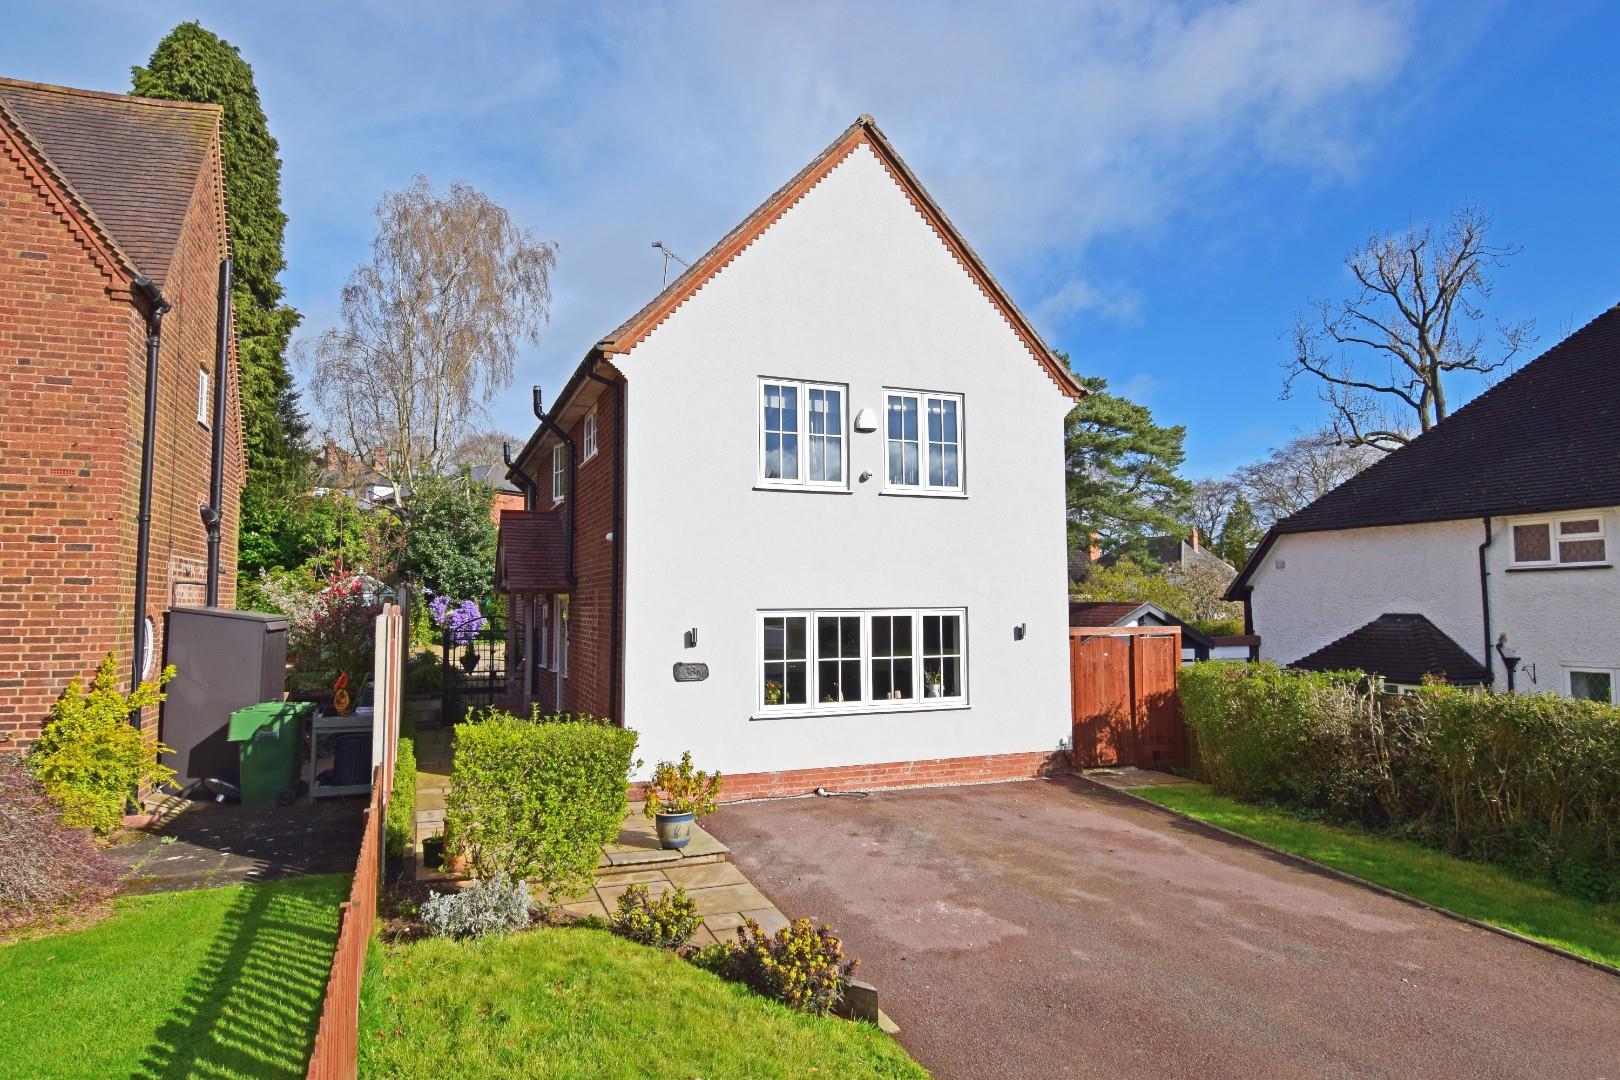 33A Fiery Hill Road, Barnt Green, Worcestershire, B45 8LE